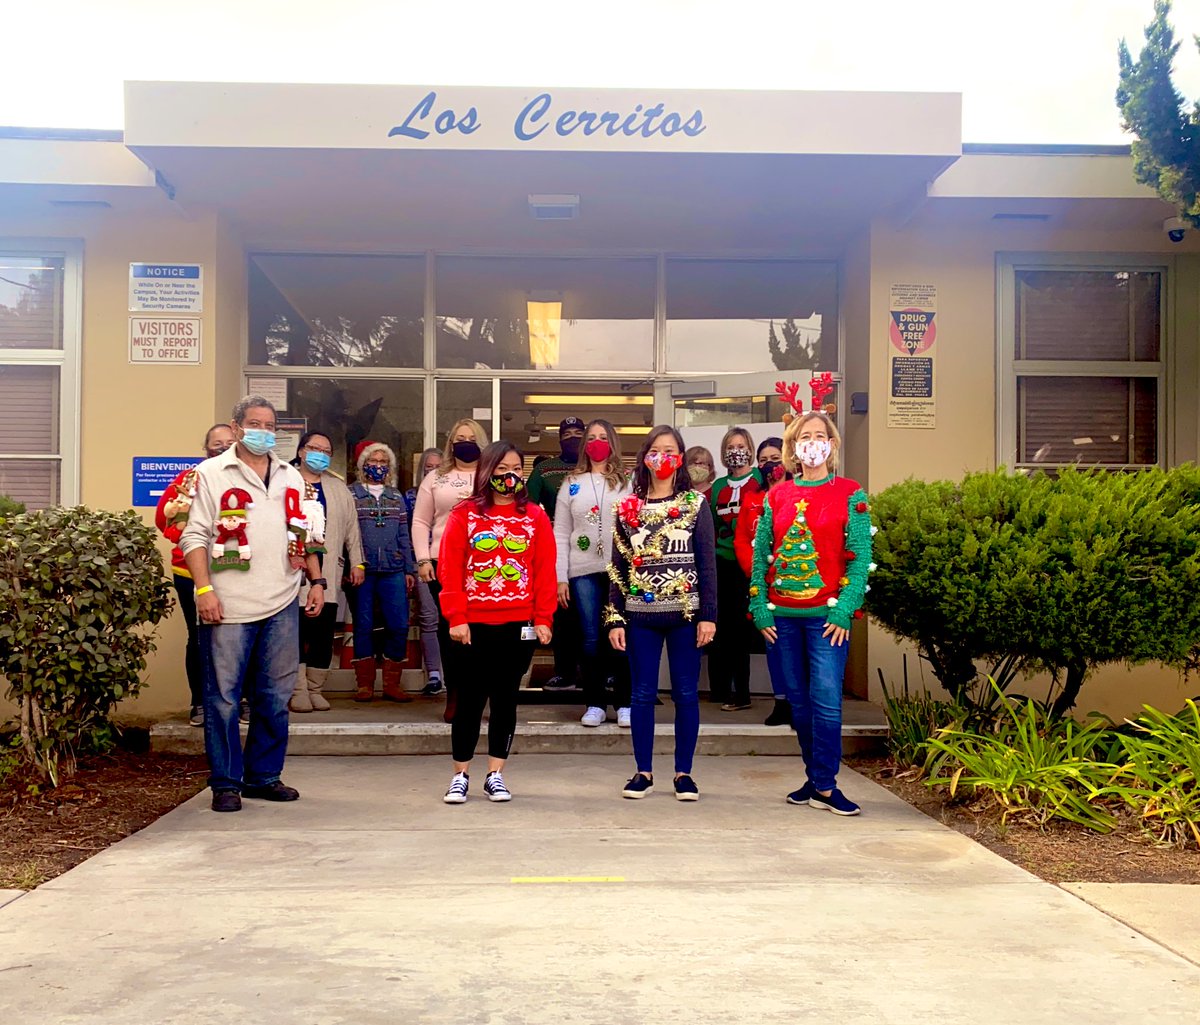 6th Day of Holiday Cheer: It’s Ugly Sweater Day #roadrunnerStrong #proudtobeLBUSD